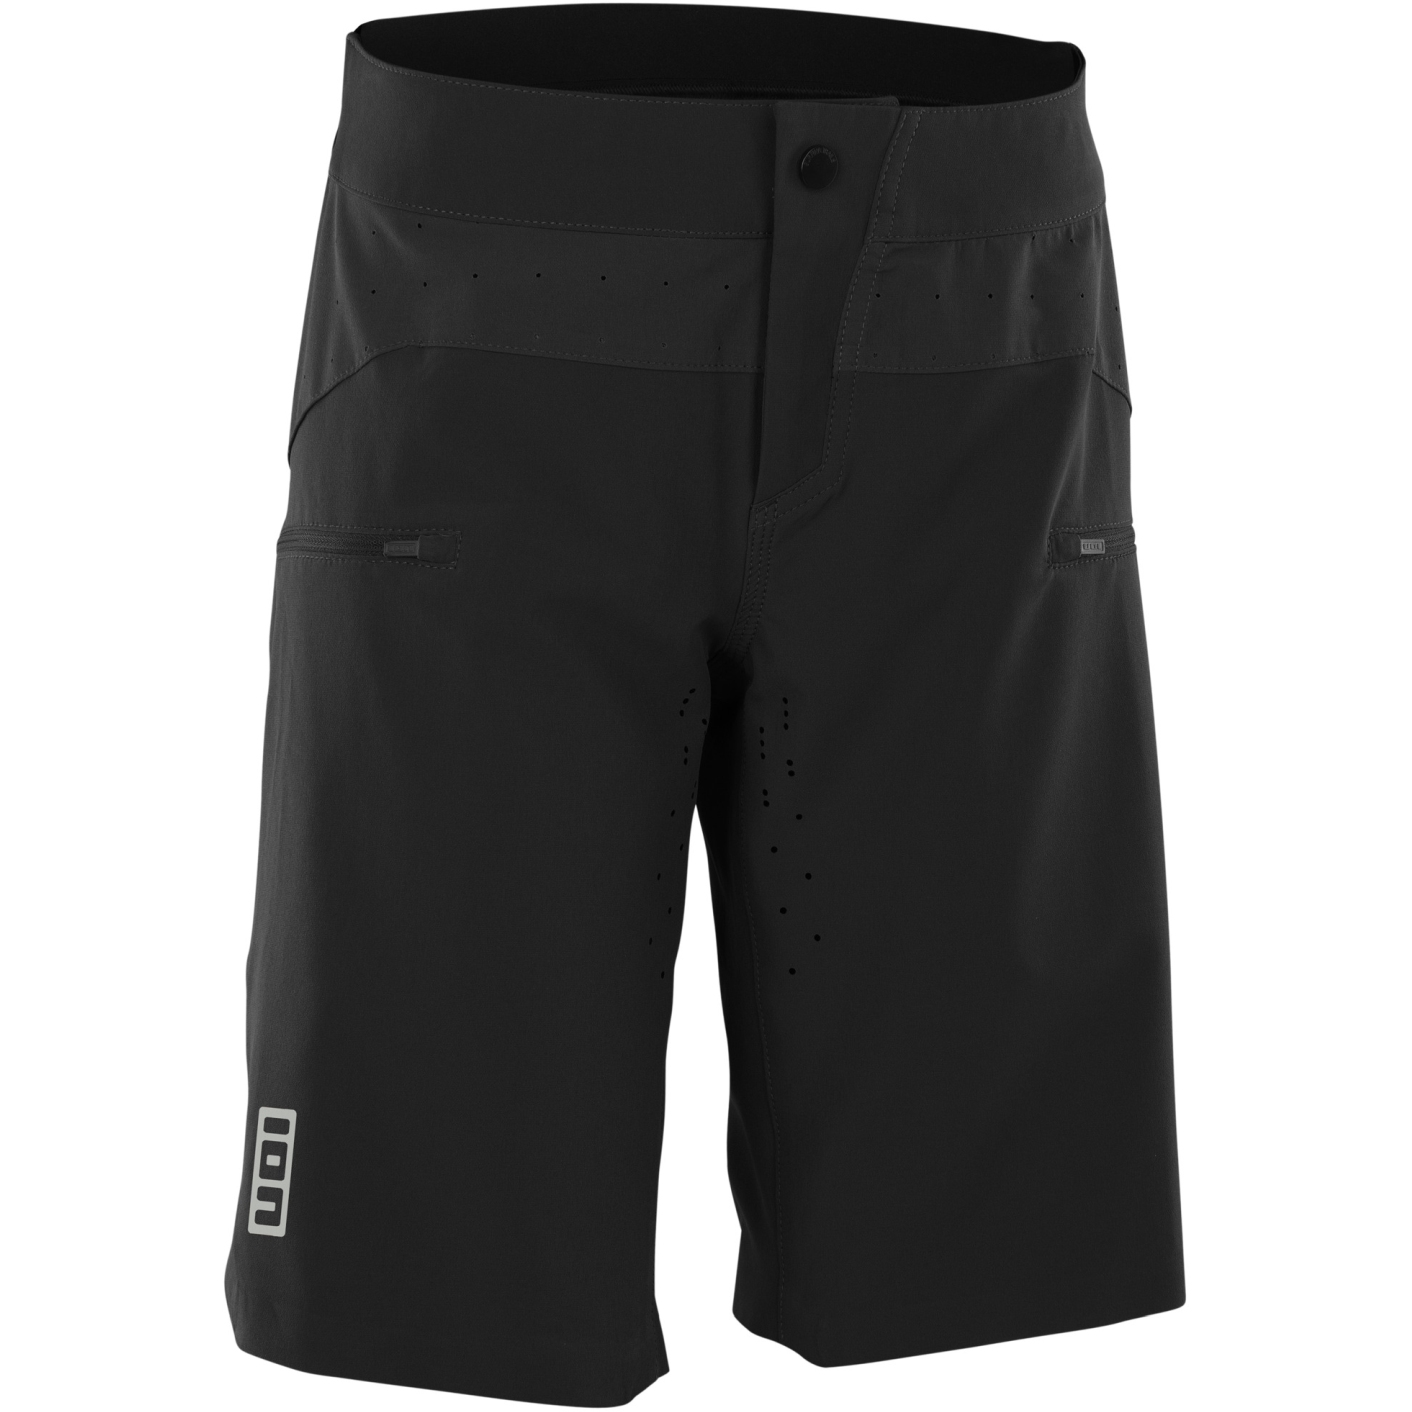 Picture of ION Bike Traze AMP AFT Shorts Women - Black